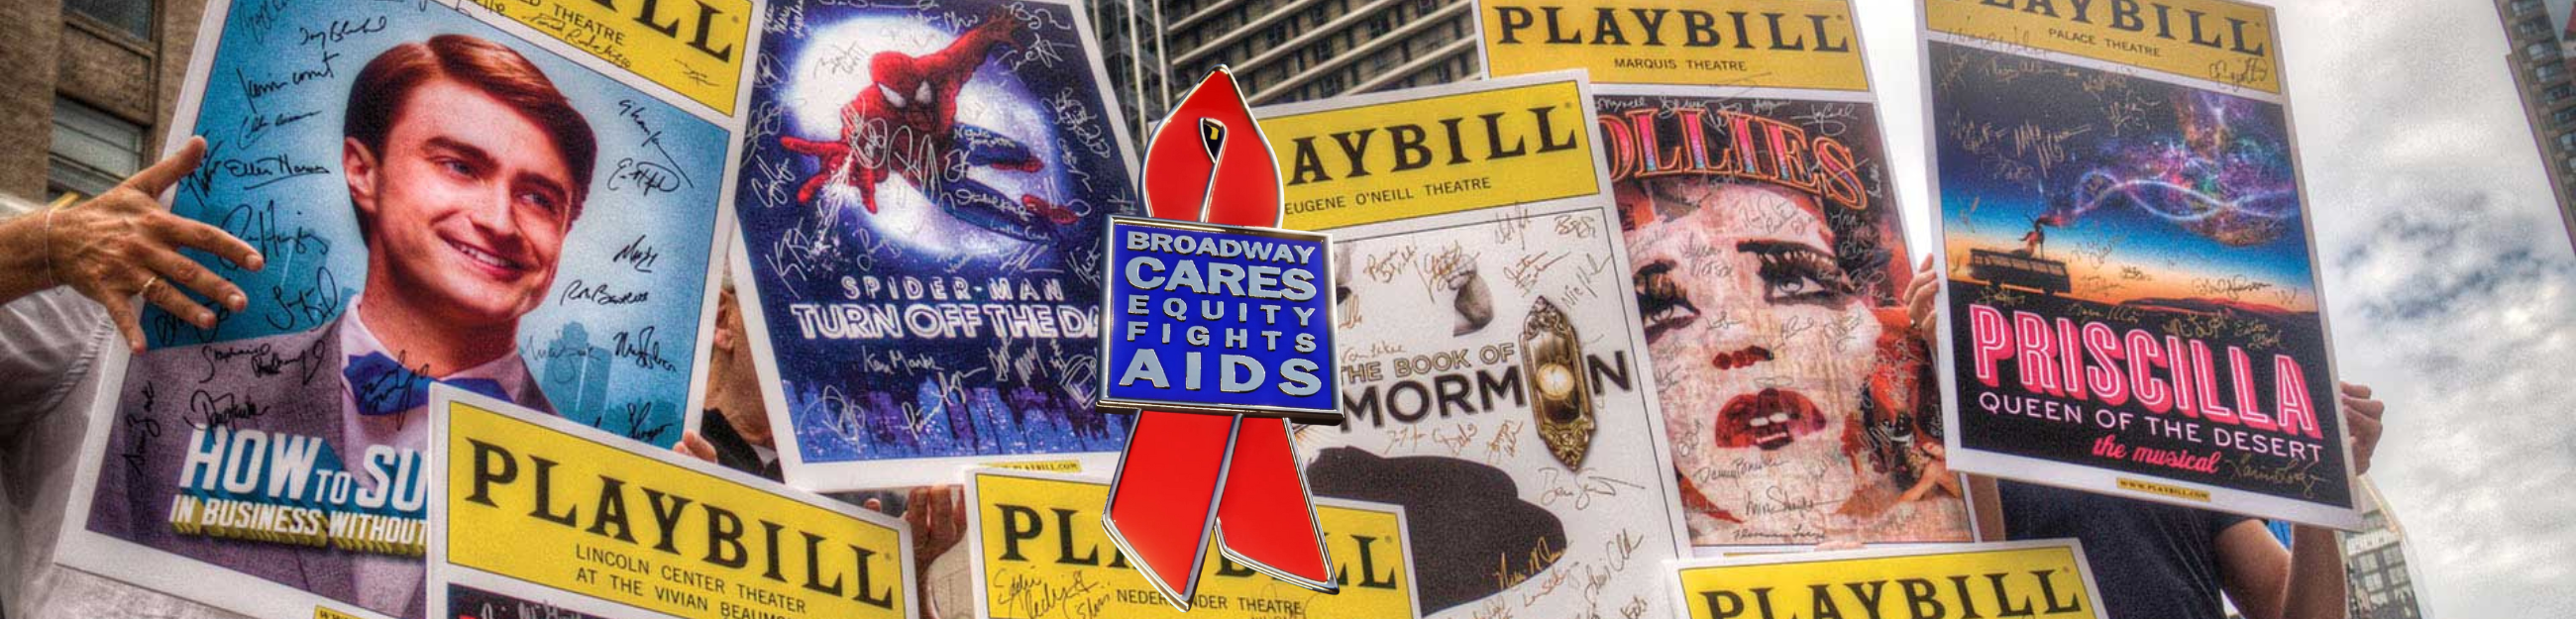 BROADWAY CARES COLLECTION